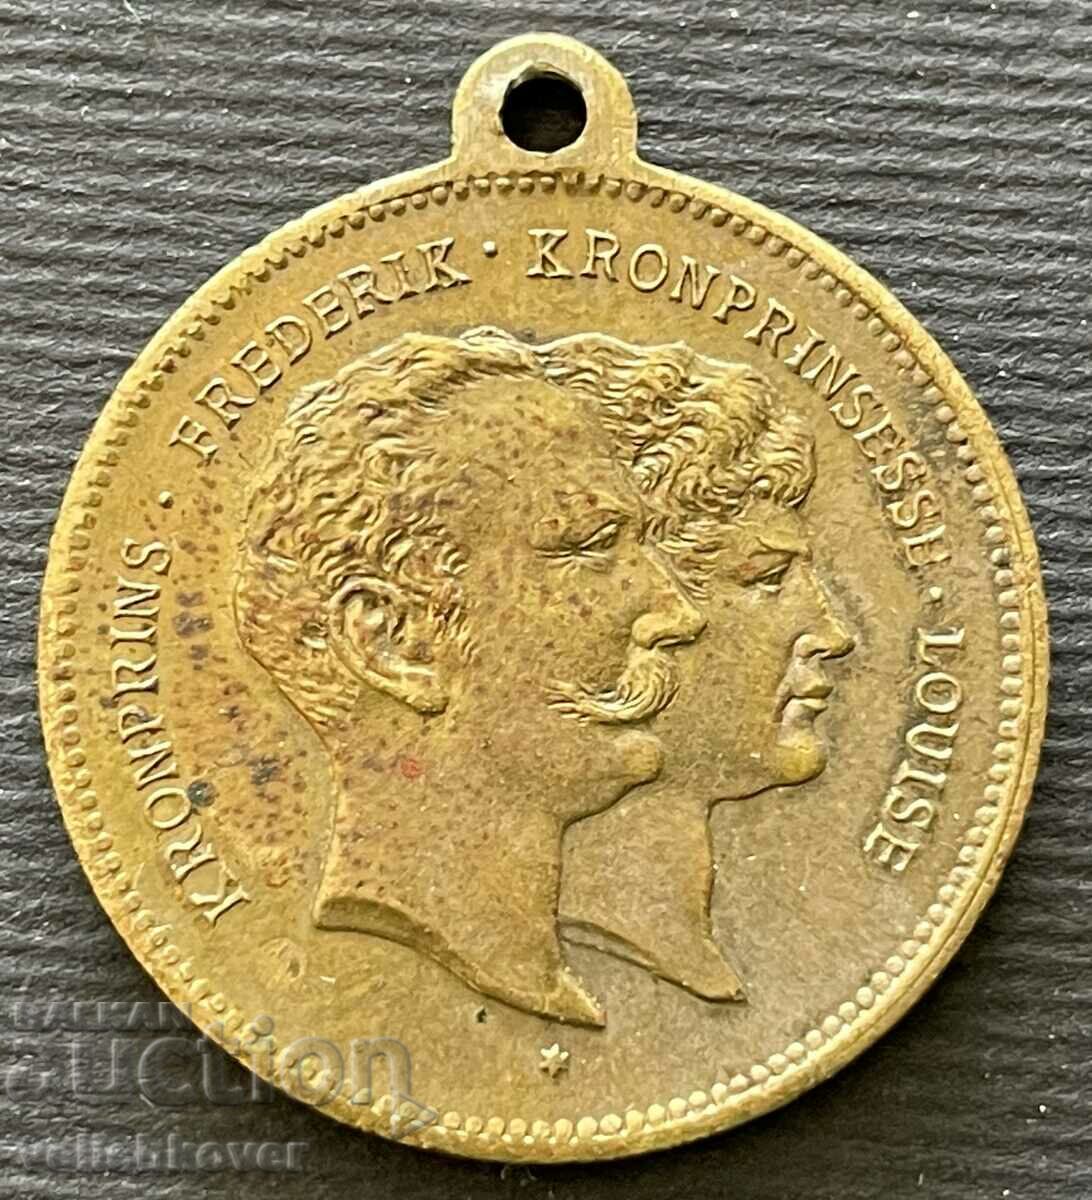 32399 Germany Medal of the Crown Prince Friedrich